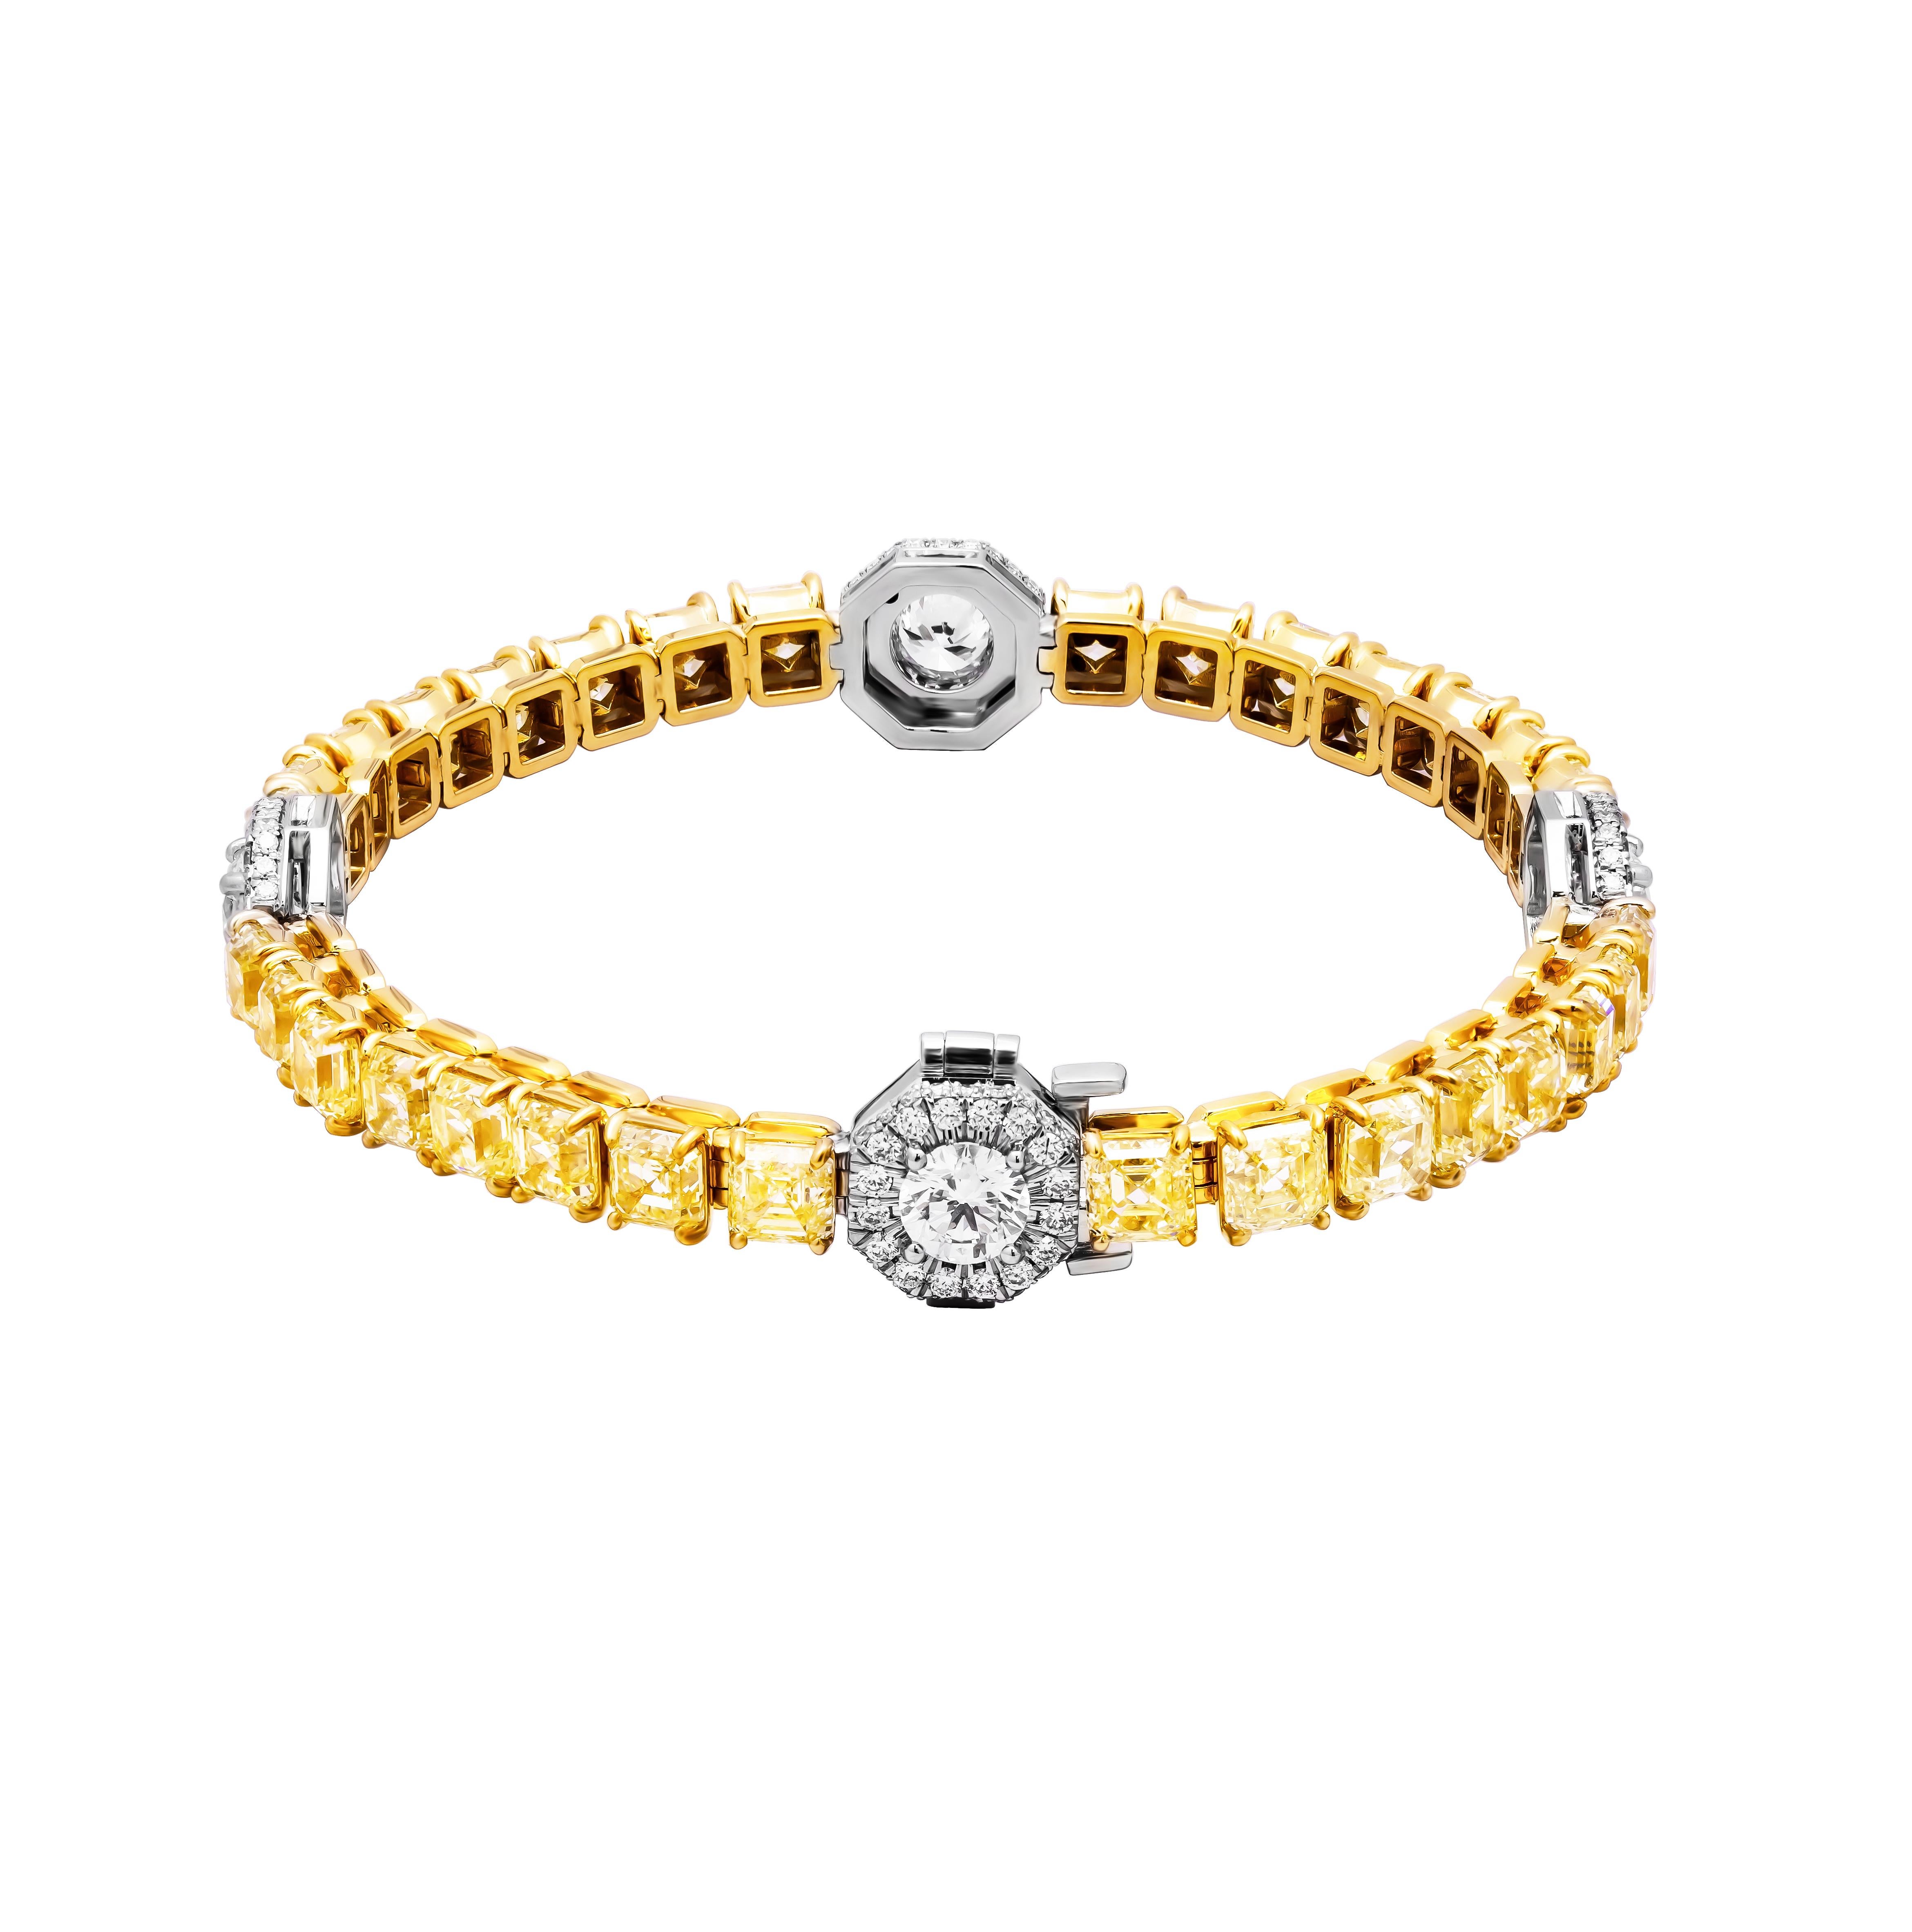 ndulge in the epitome of luxury and sophistication with this breathtaking tennis bracelet, meticulously crafted in a fusion of 18K yellow gold and 950 platinum. Adorned with a mesmerizing array of Asscher-cut fancy yellow diamonds and round white